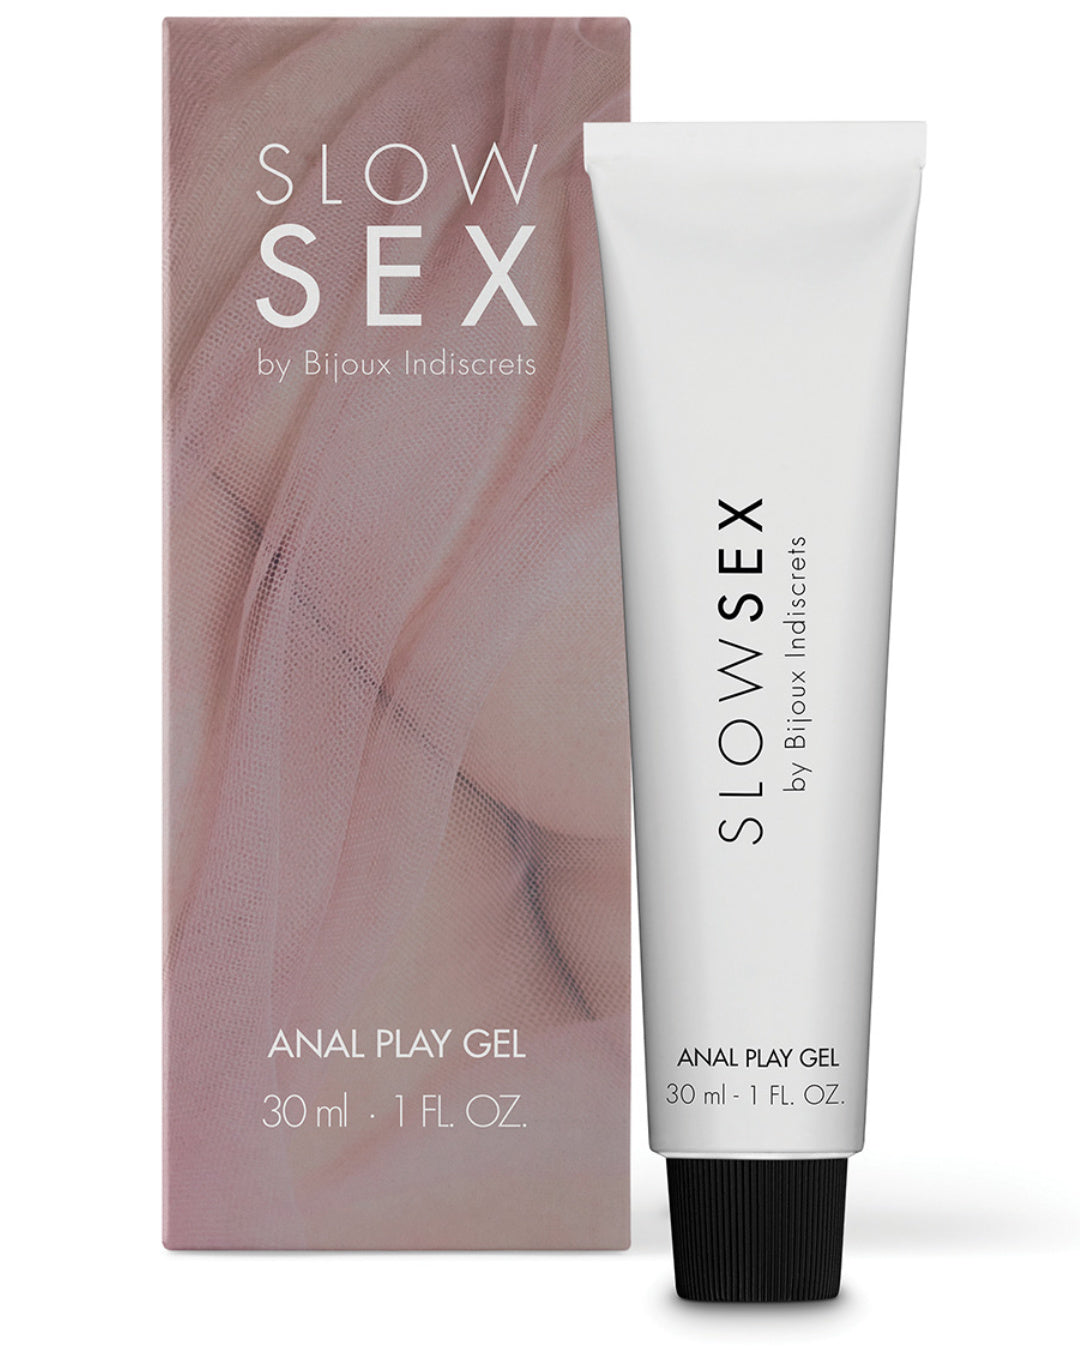 Bijoux  Indiscrets Slow Sex Anal Play Gel 1 oz and box